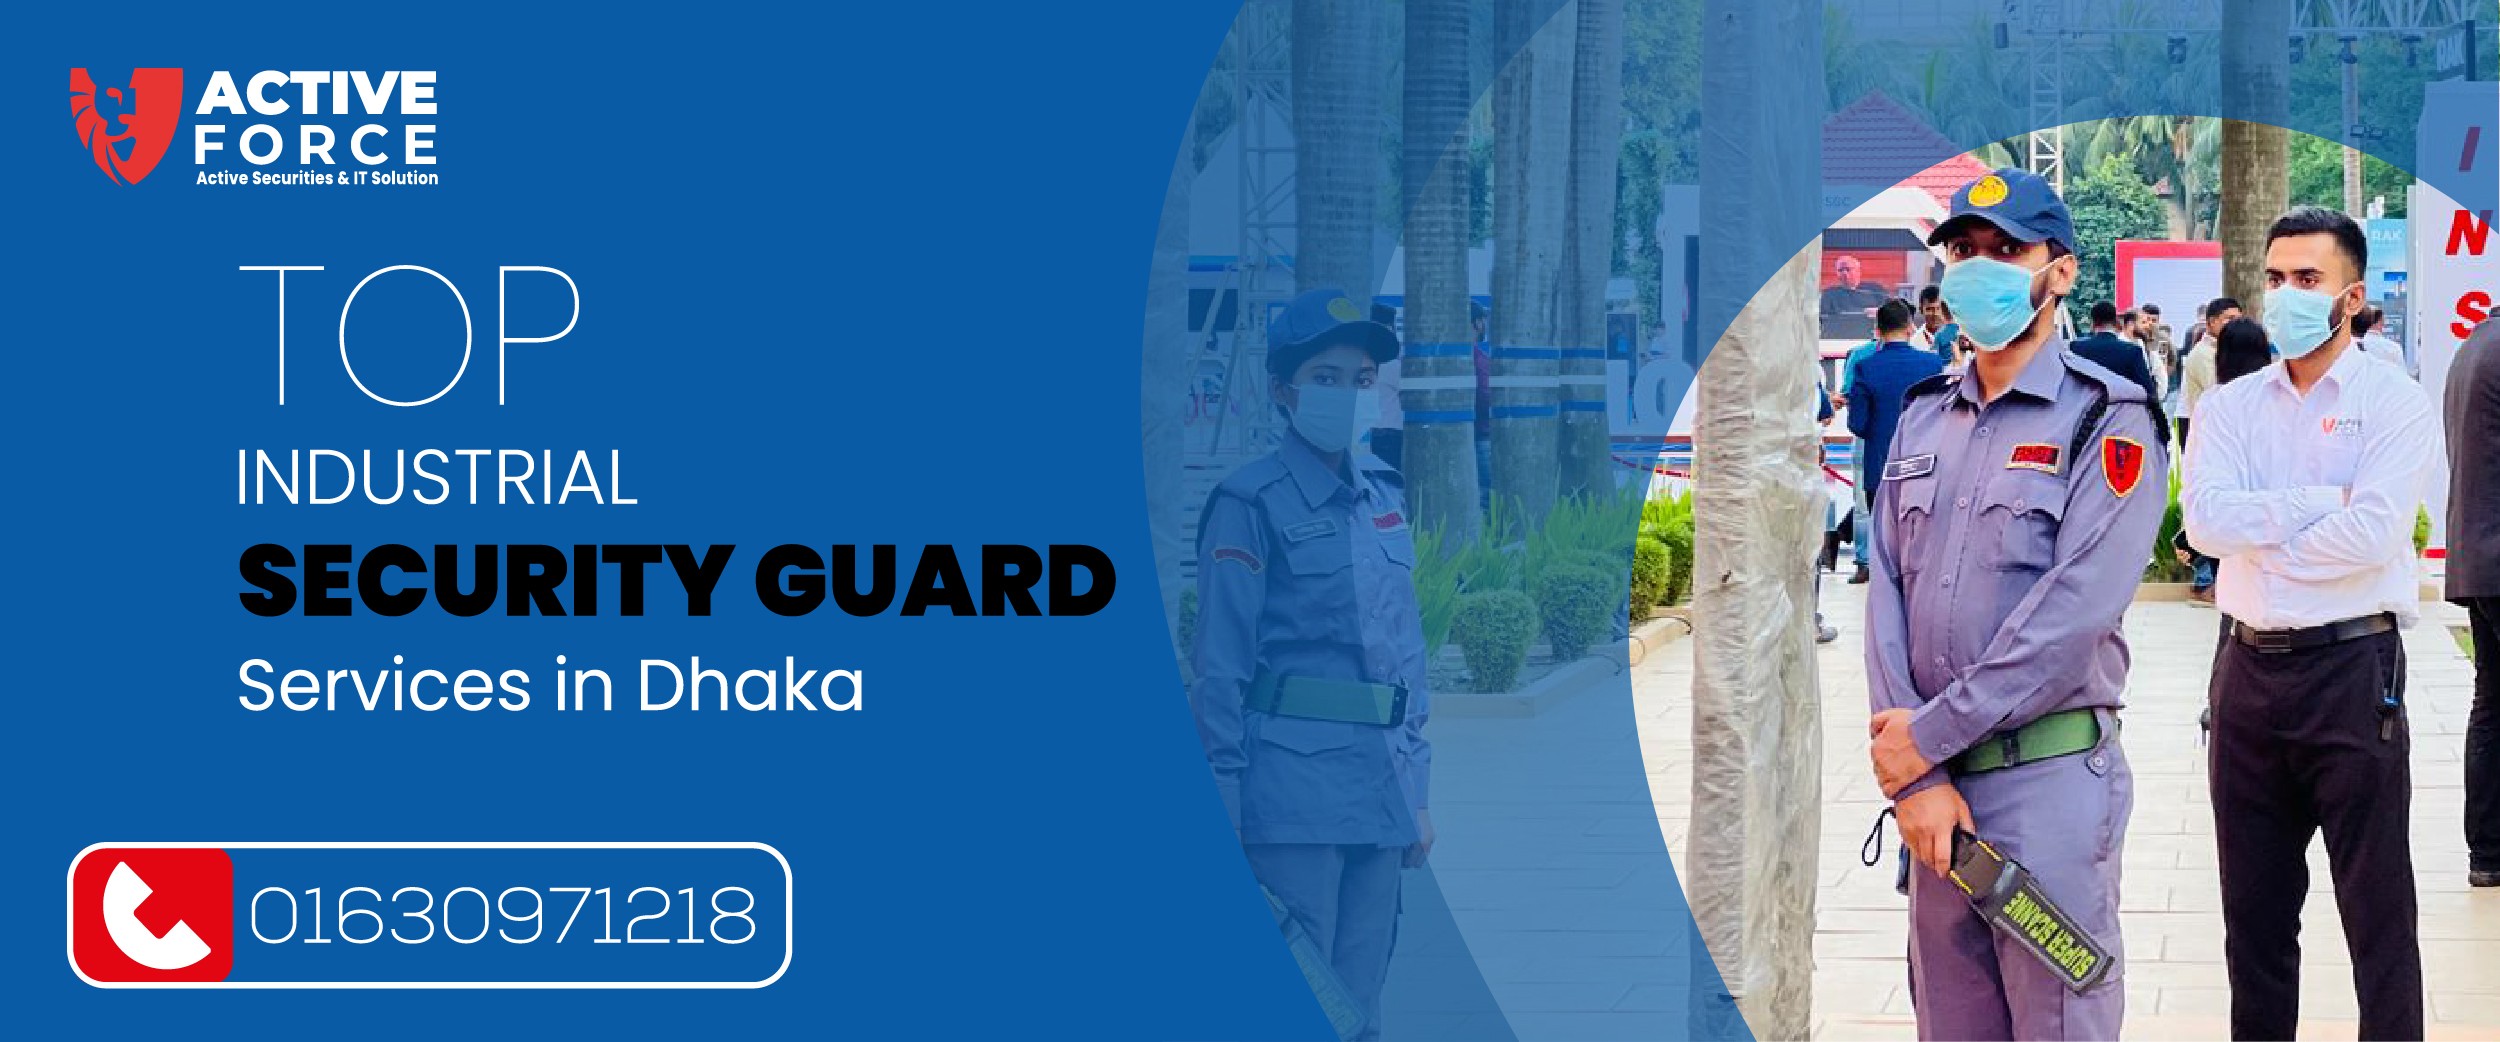 Secure Your Business with Top Industrial Security Guard Services in Dhaka